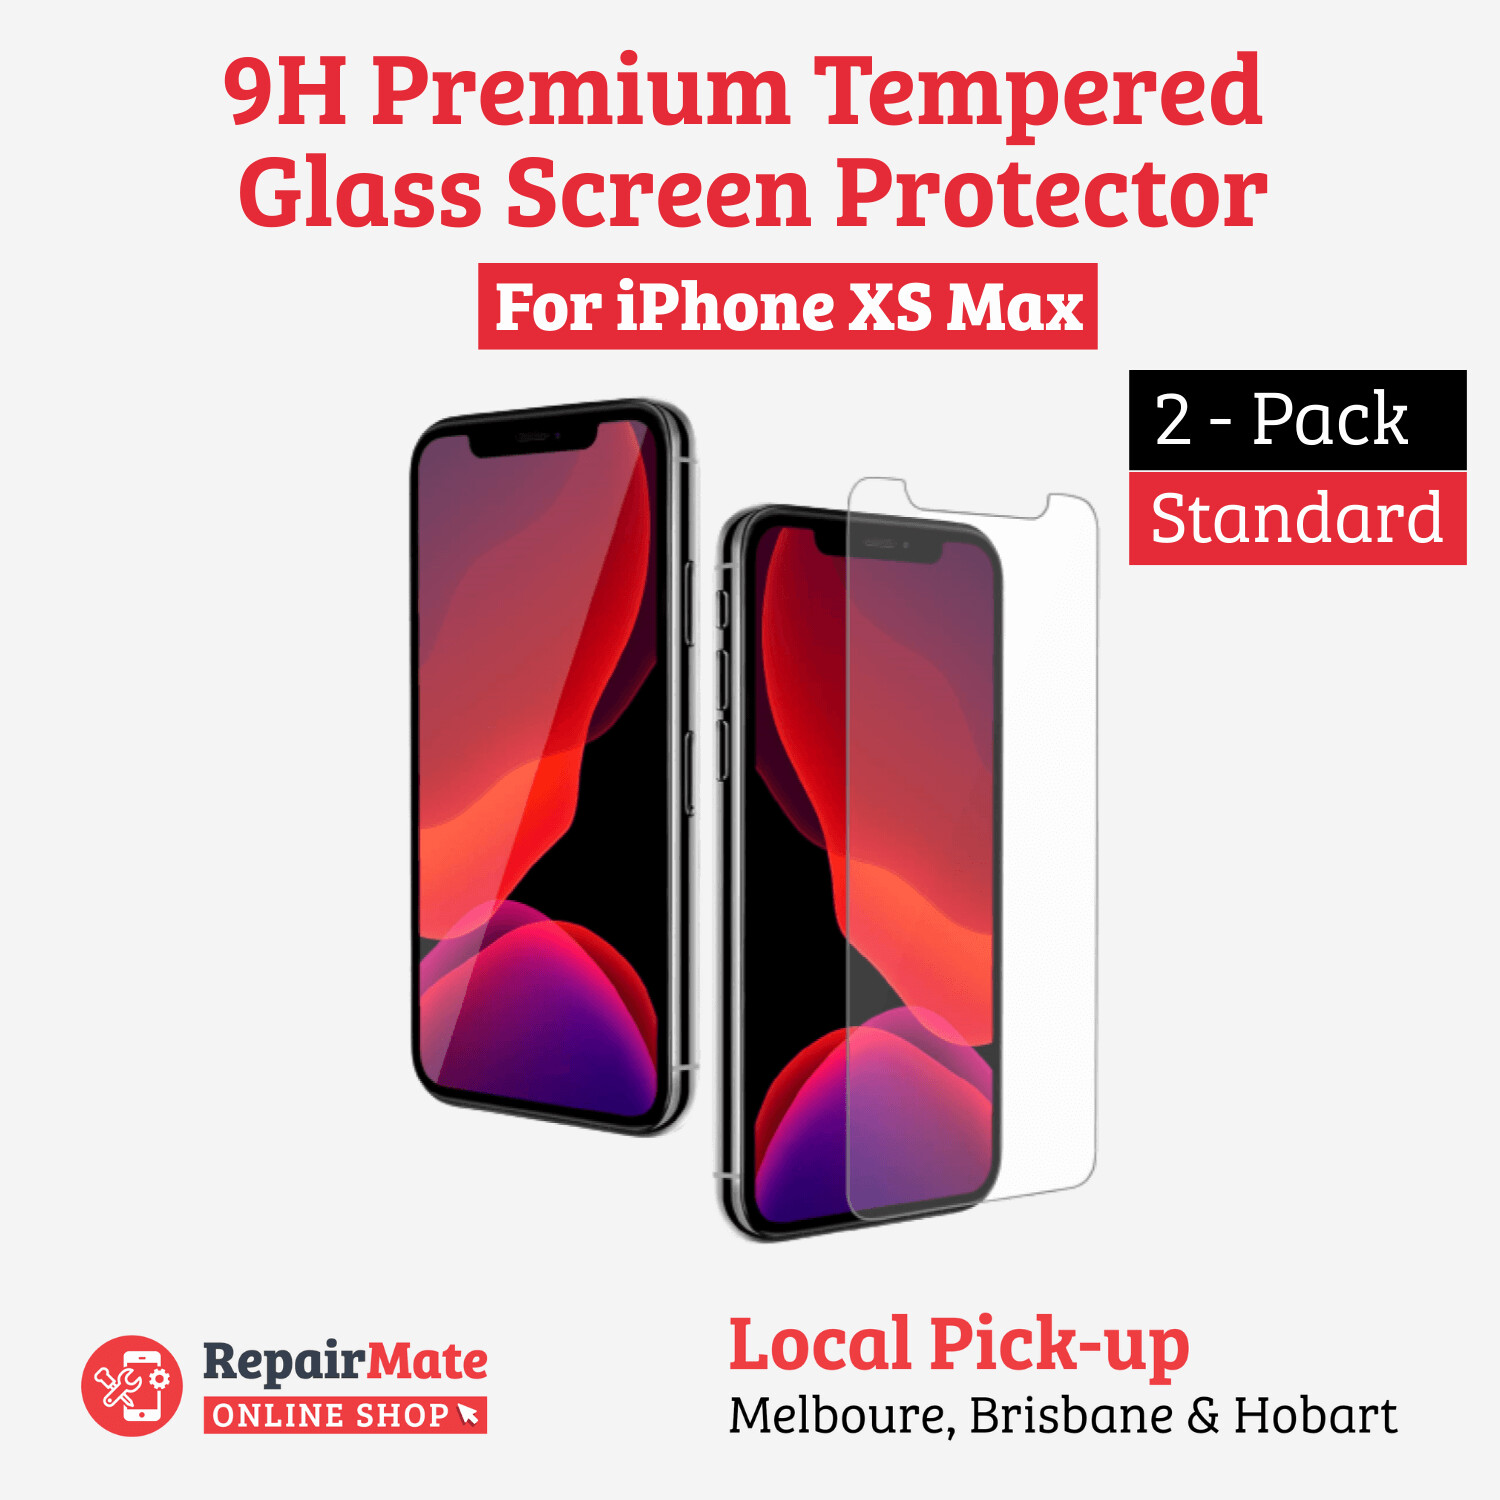 iPhone XS Max 9H Premium Tempered Glass Screen Protector [2 Pack]